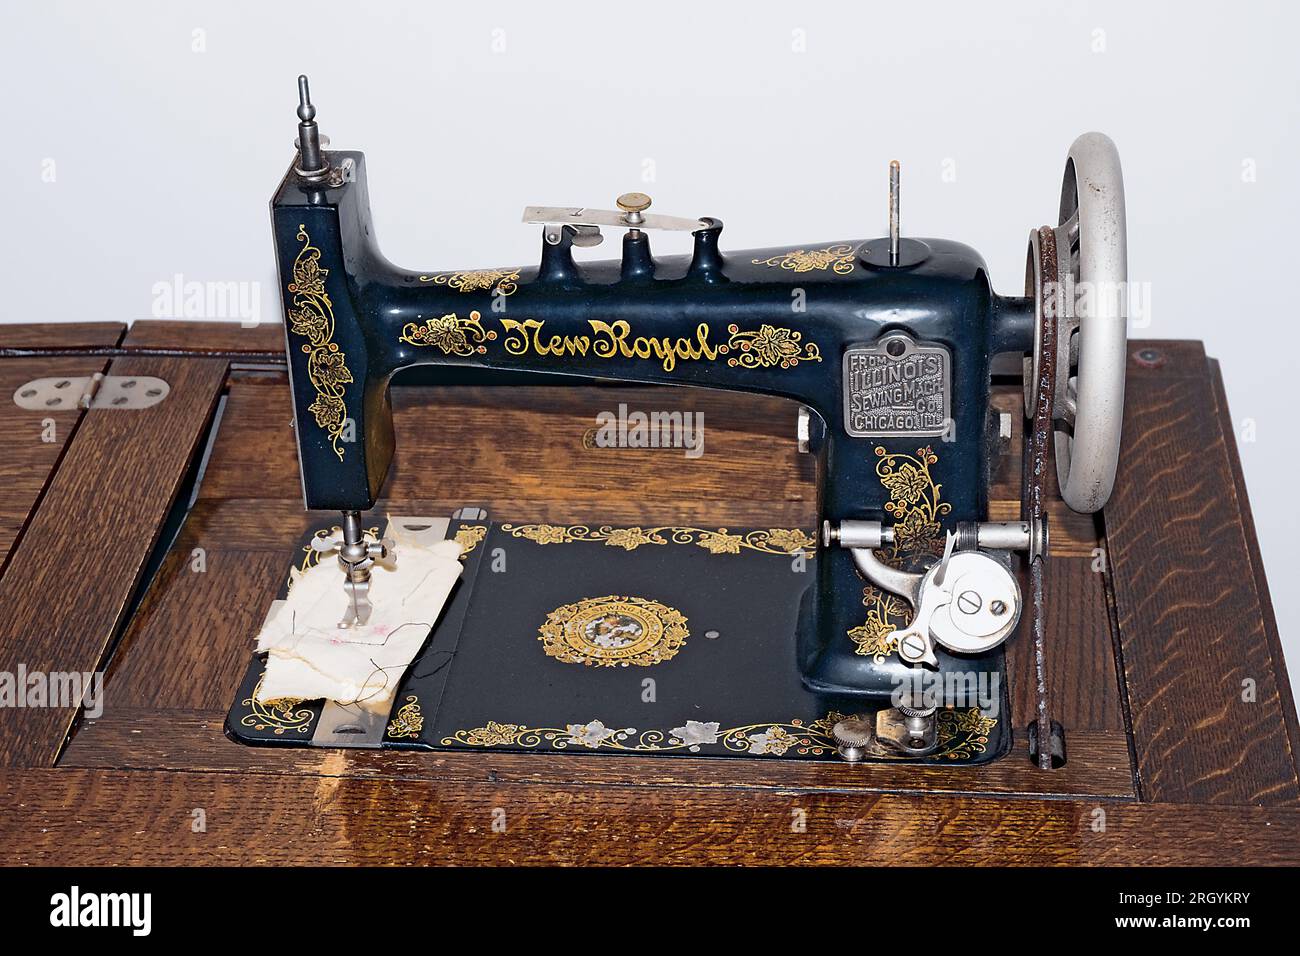 Sewing Machine Brother Mechanical White Courts Antigua